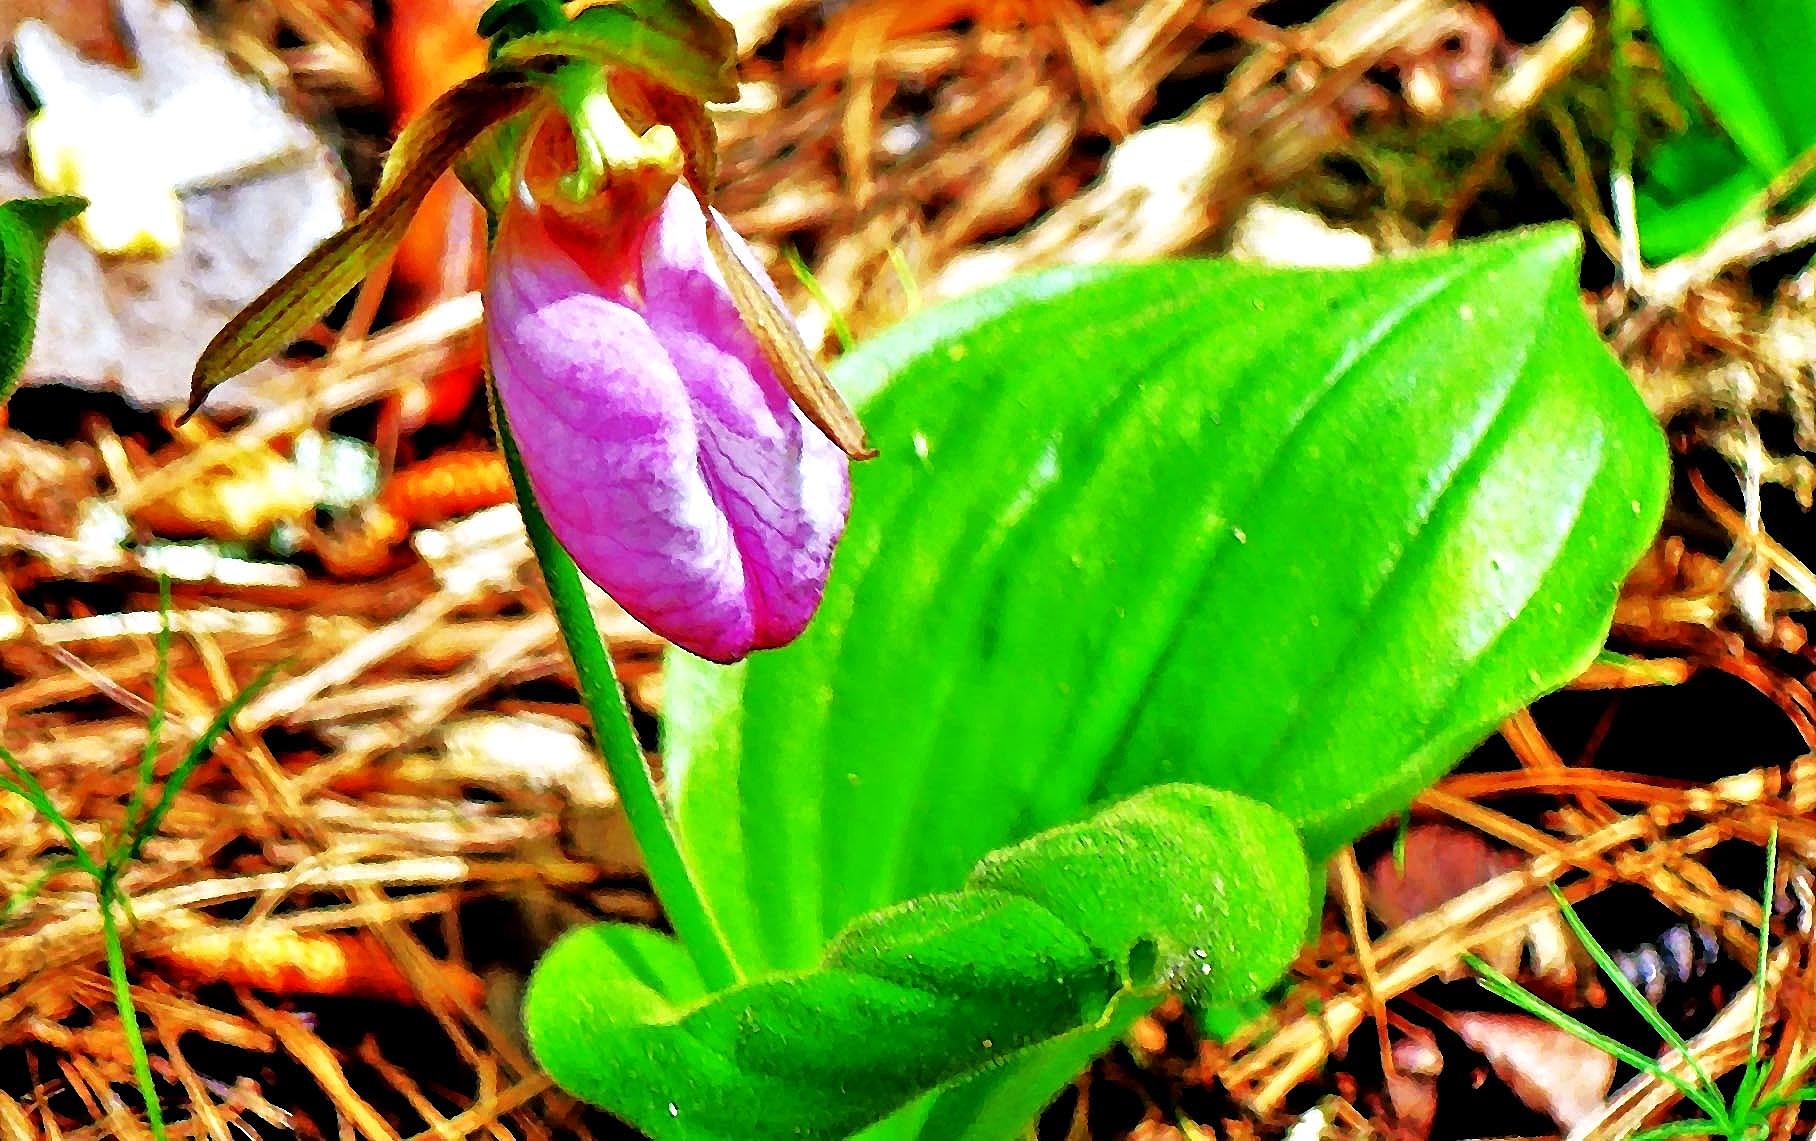 Wild lovers pink lady's slippers from bulldozers